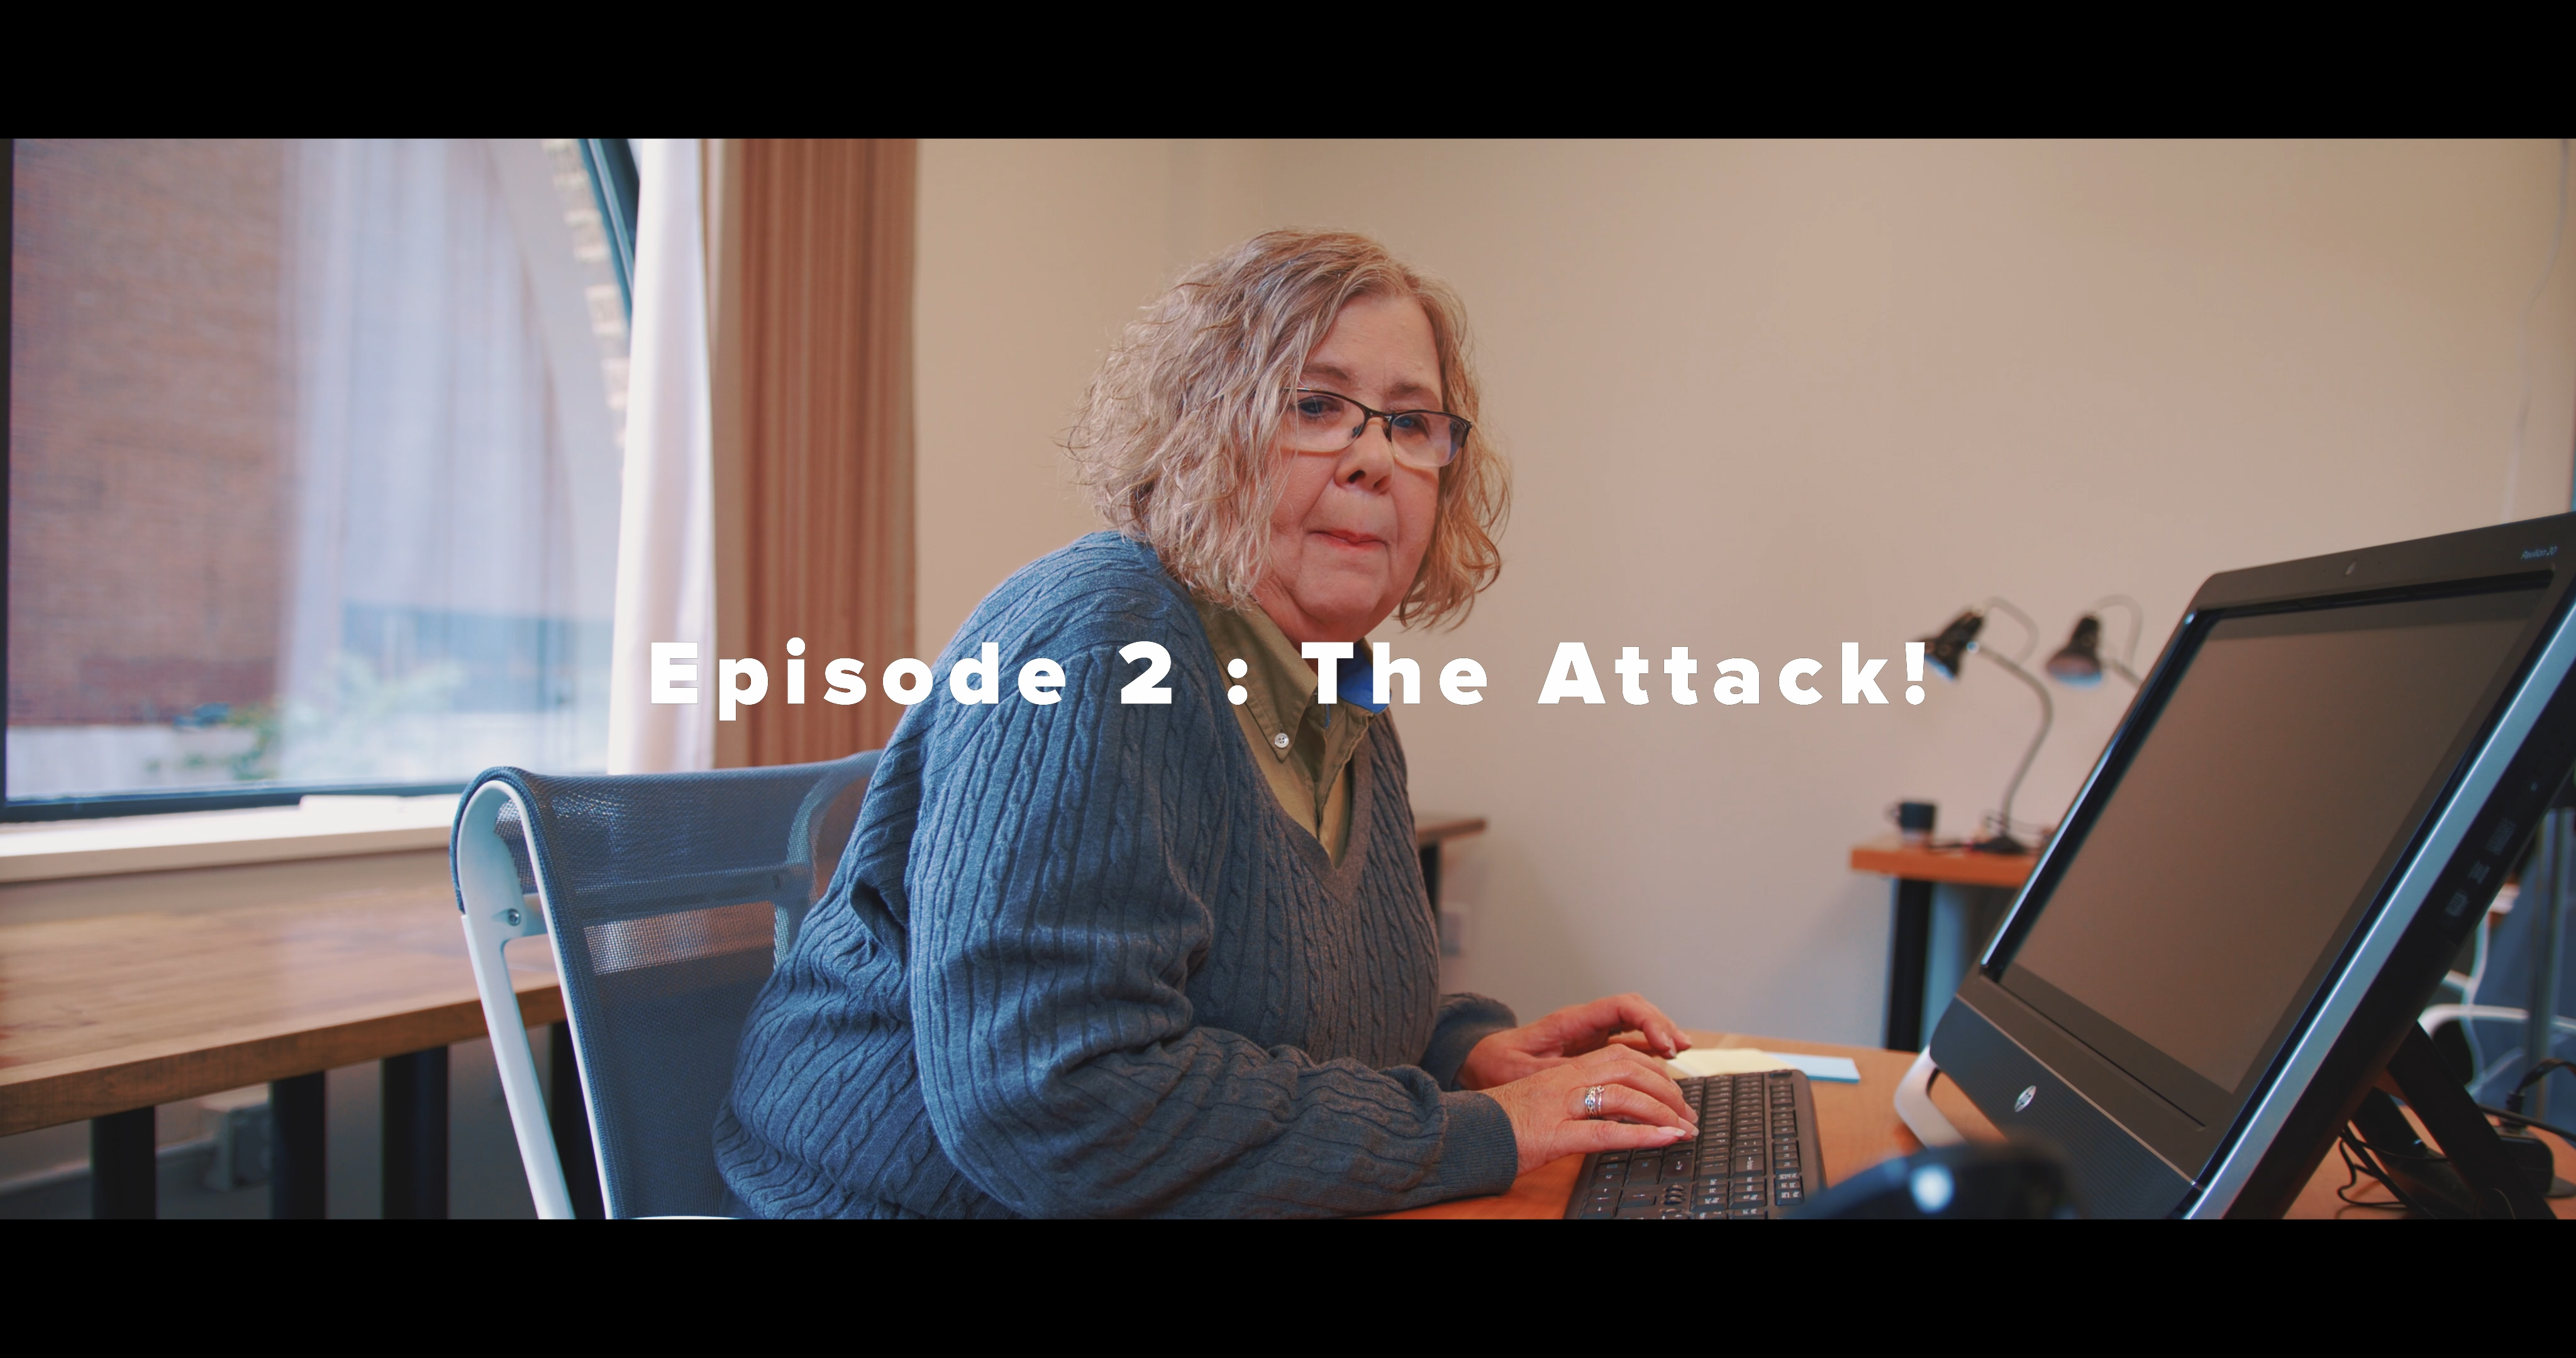 Don't Be Jan episode 2 covering voice phishing attacks